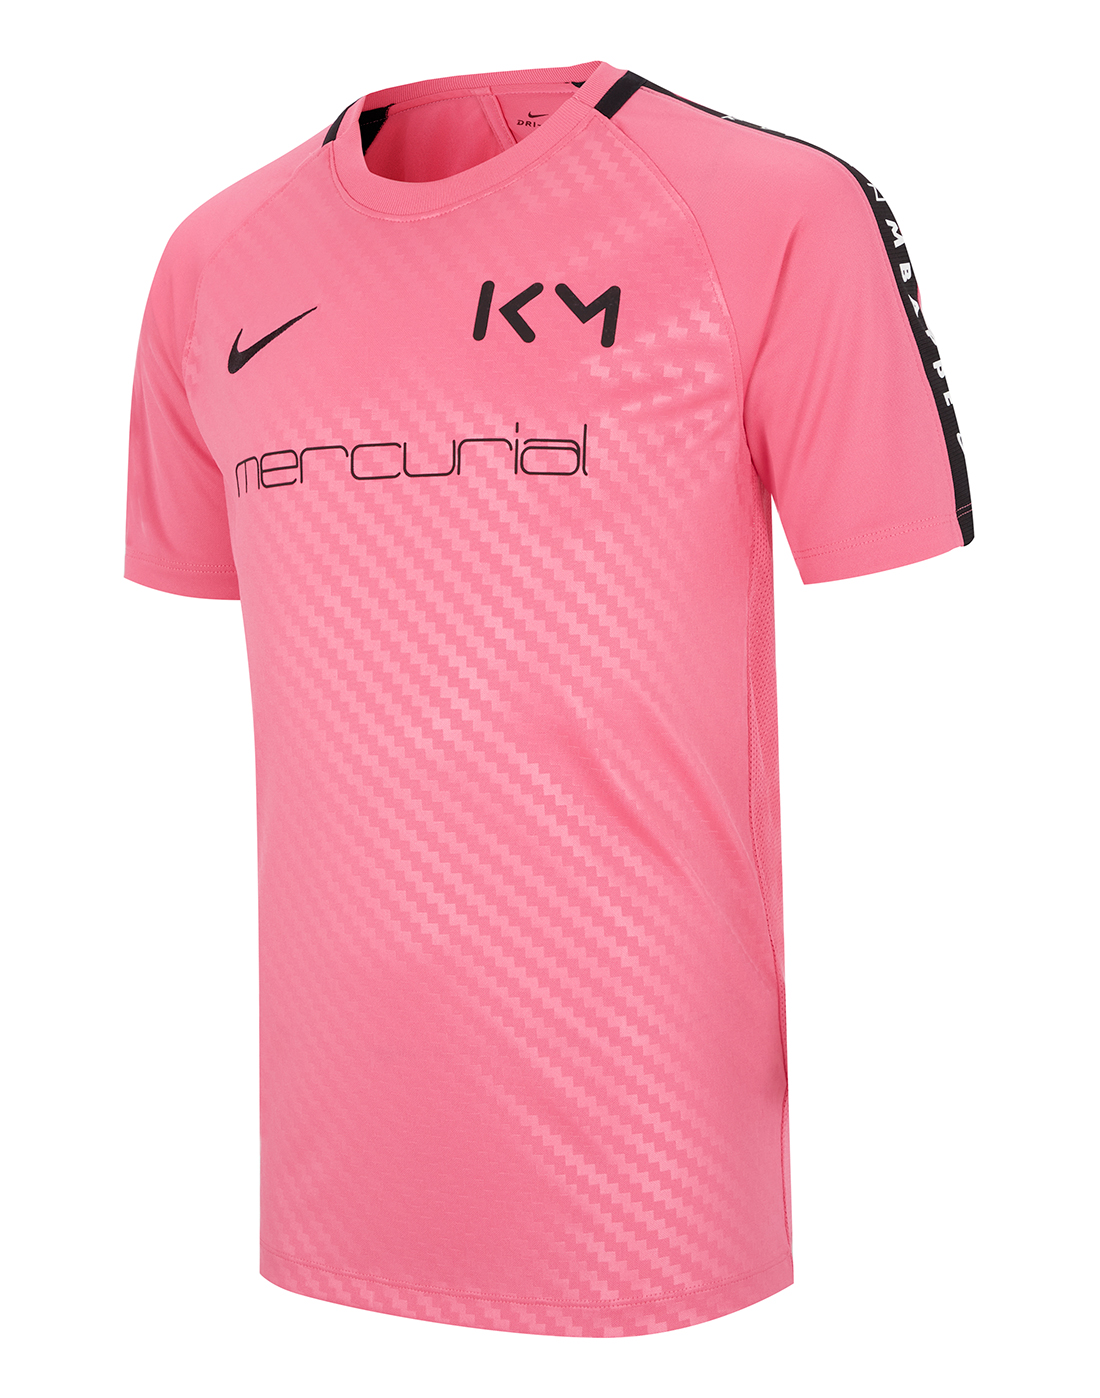 Nike Older Kids Mbappe T-Shirt - Pink | Life Style Sports IE